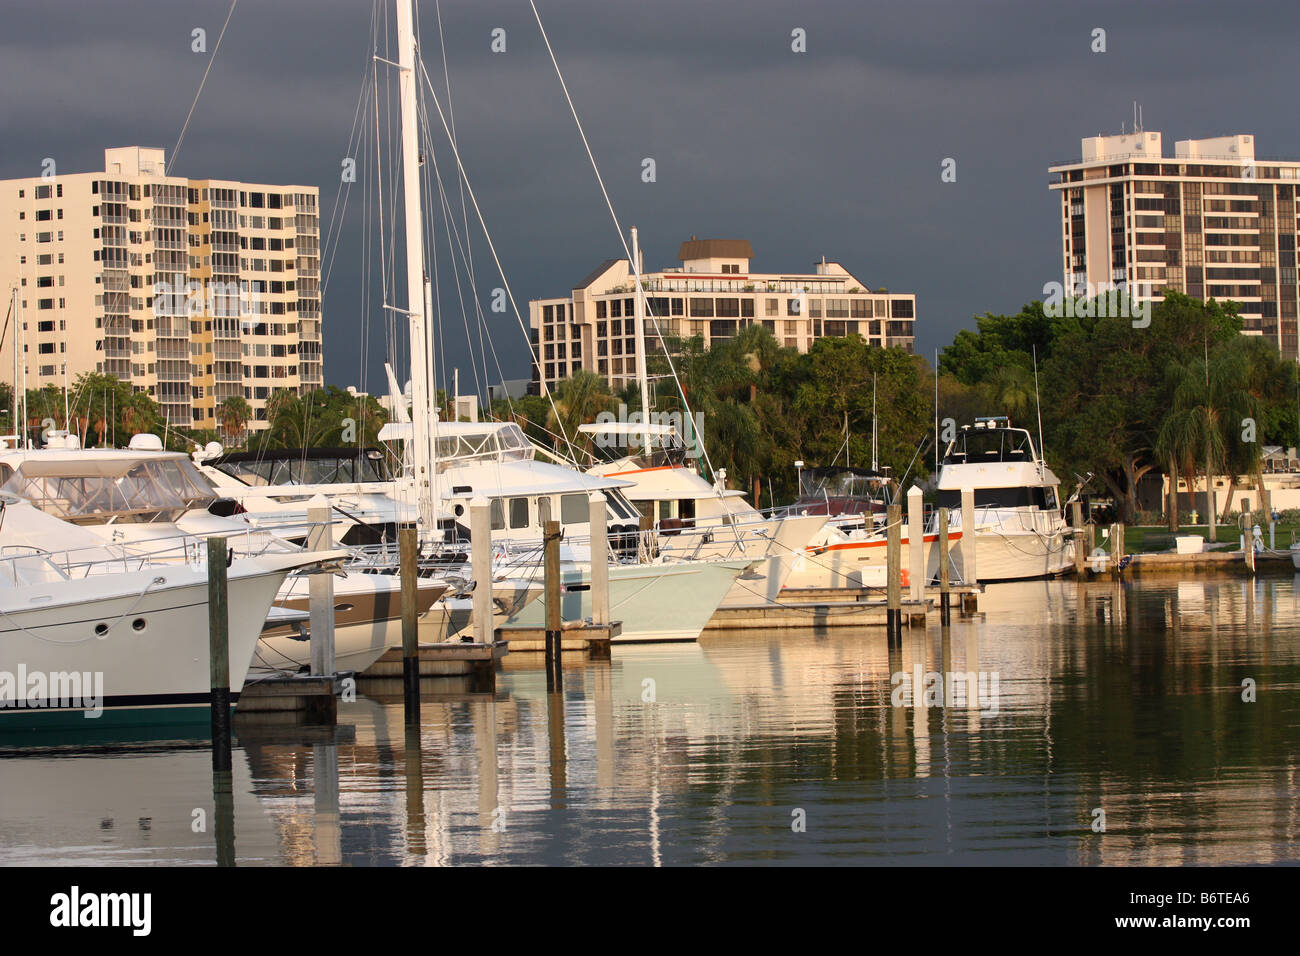 Boat marina with condos and palm trees in background in Sarasota Florida Stock Photo